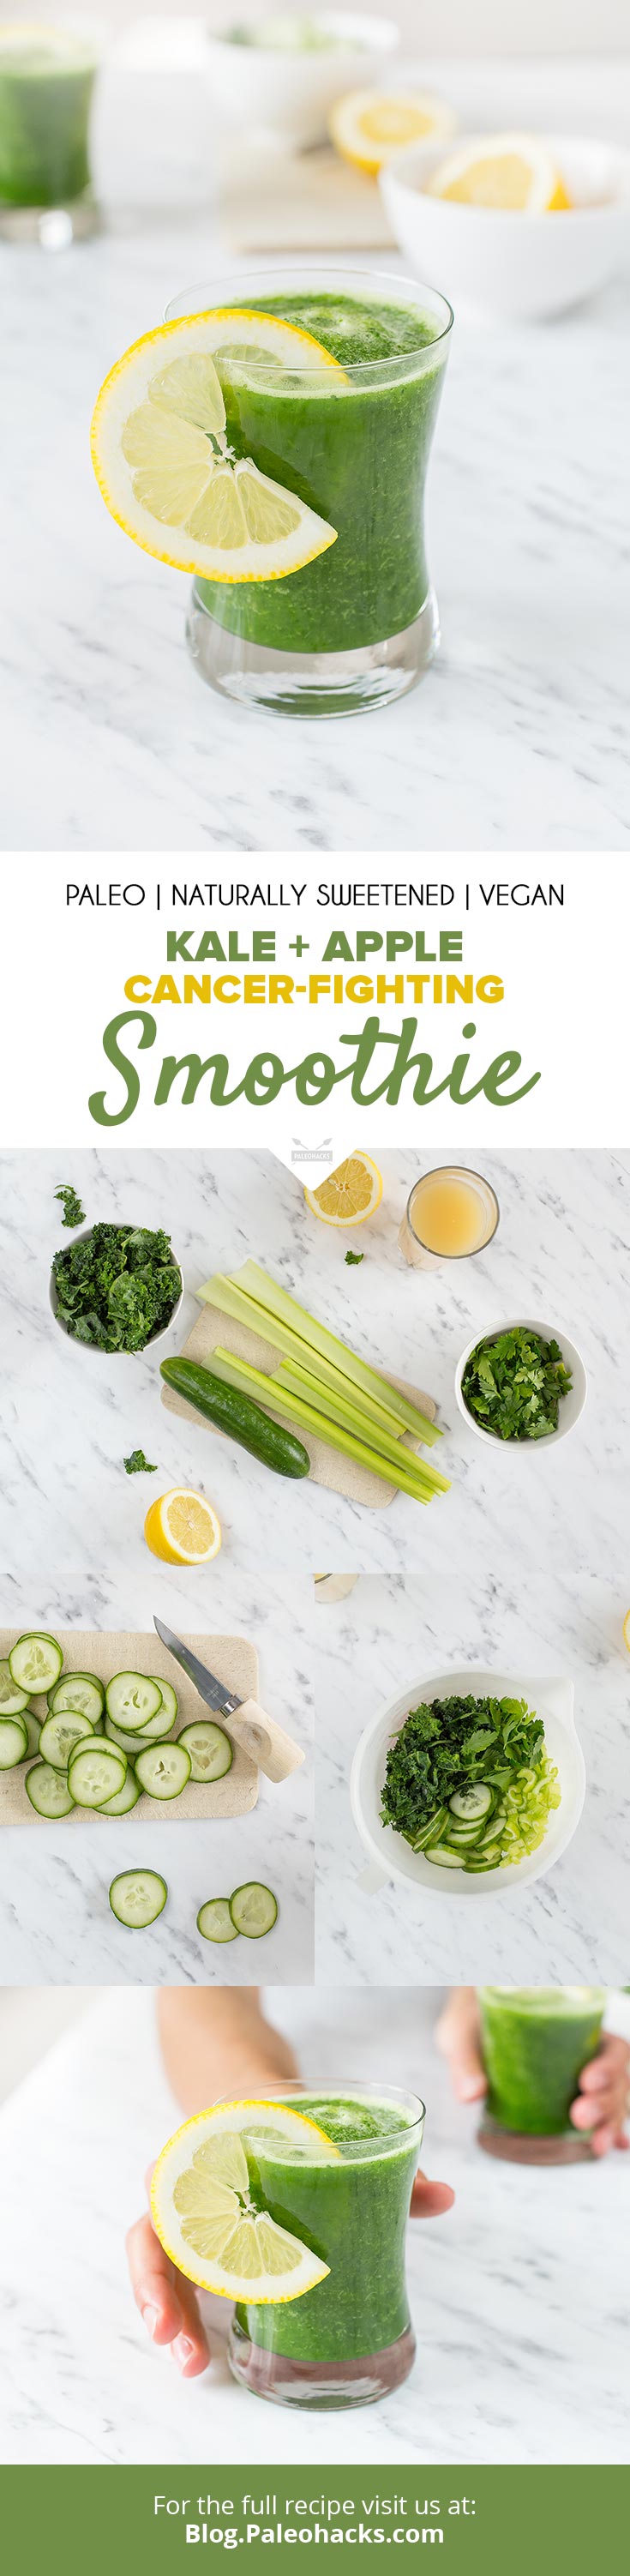 Drink your way to good health with this Cancer-Fighting Smoothie you can make in five minutes. This drink is superfood magic in a glass!